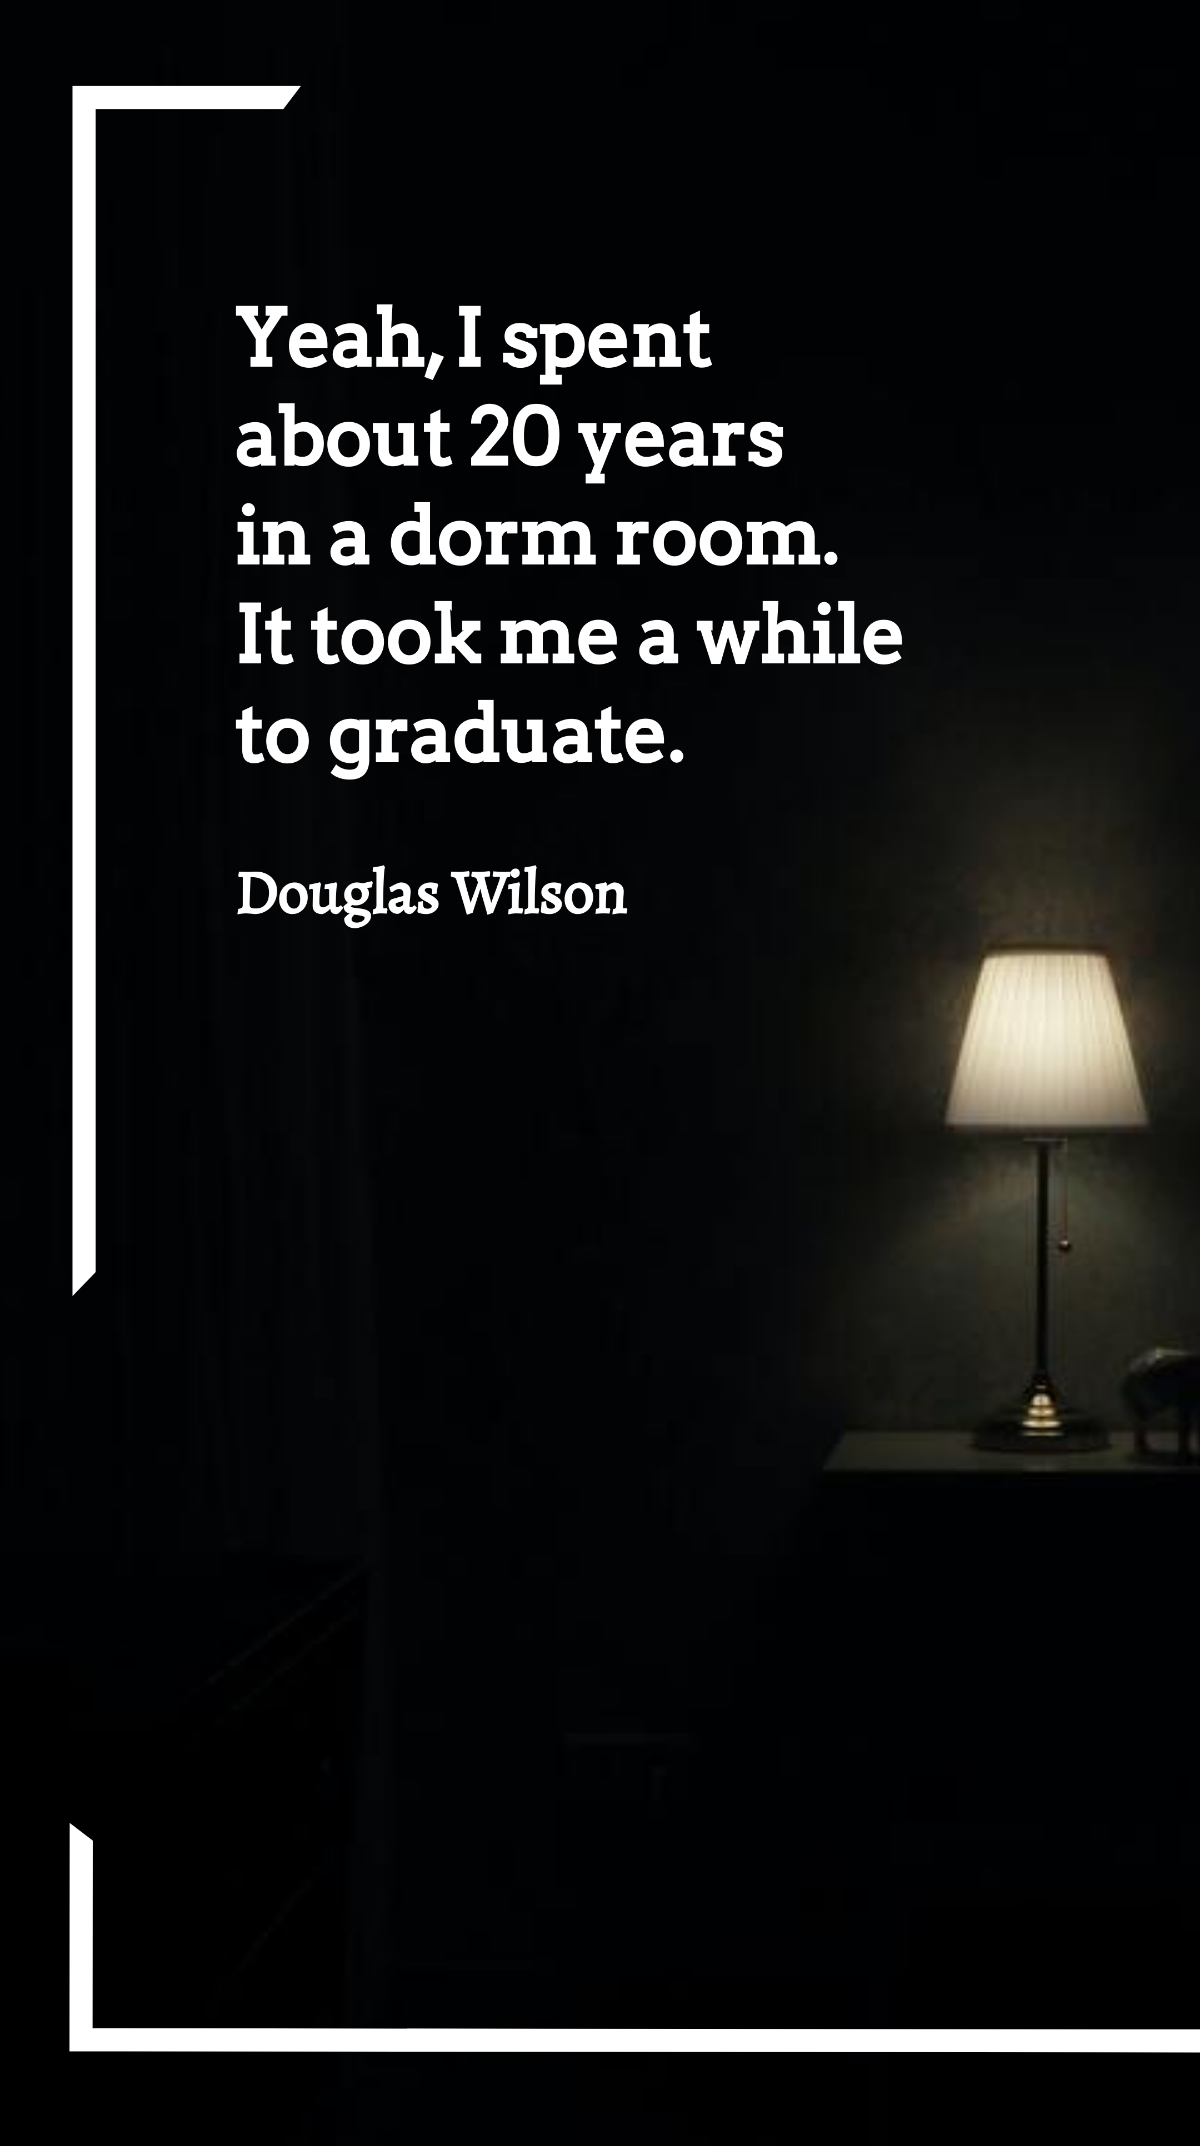 Douglas Wilson - Yeah, I spent about 20 years in a dorm room. It took me a while to graduate. Template